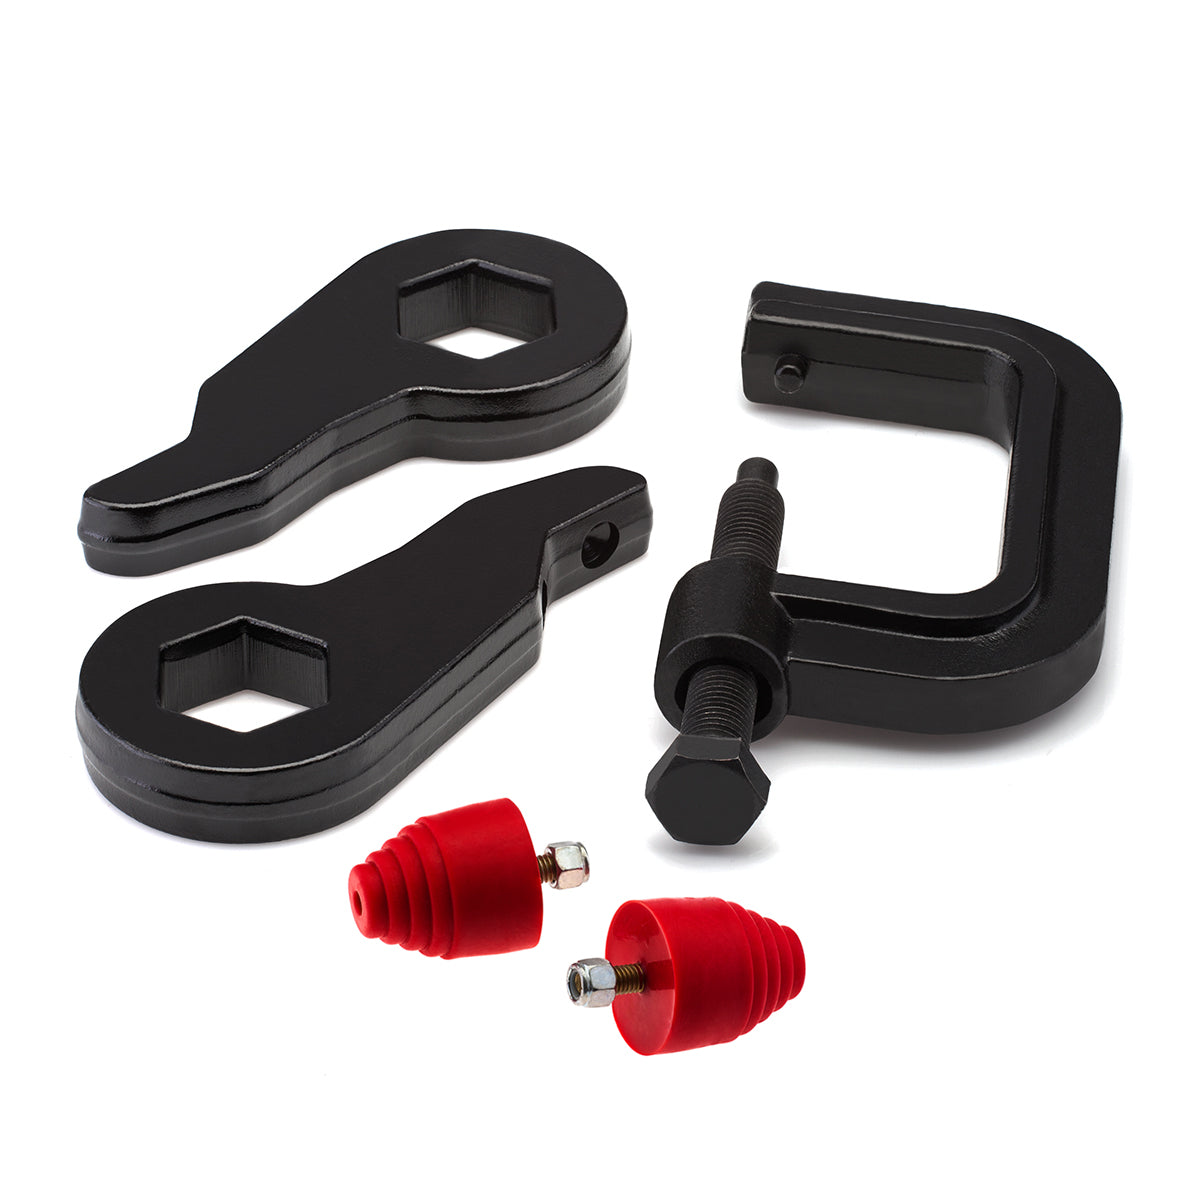 1995-2006 Chevy Tahoe 4WD Front Lift Kit with Bump Stops and Torsion Key Unloading/Removal Tool